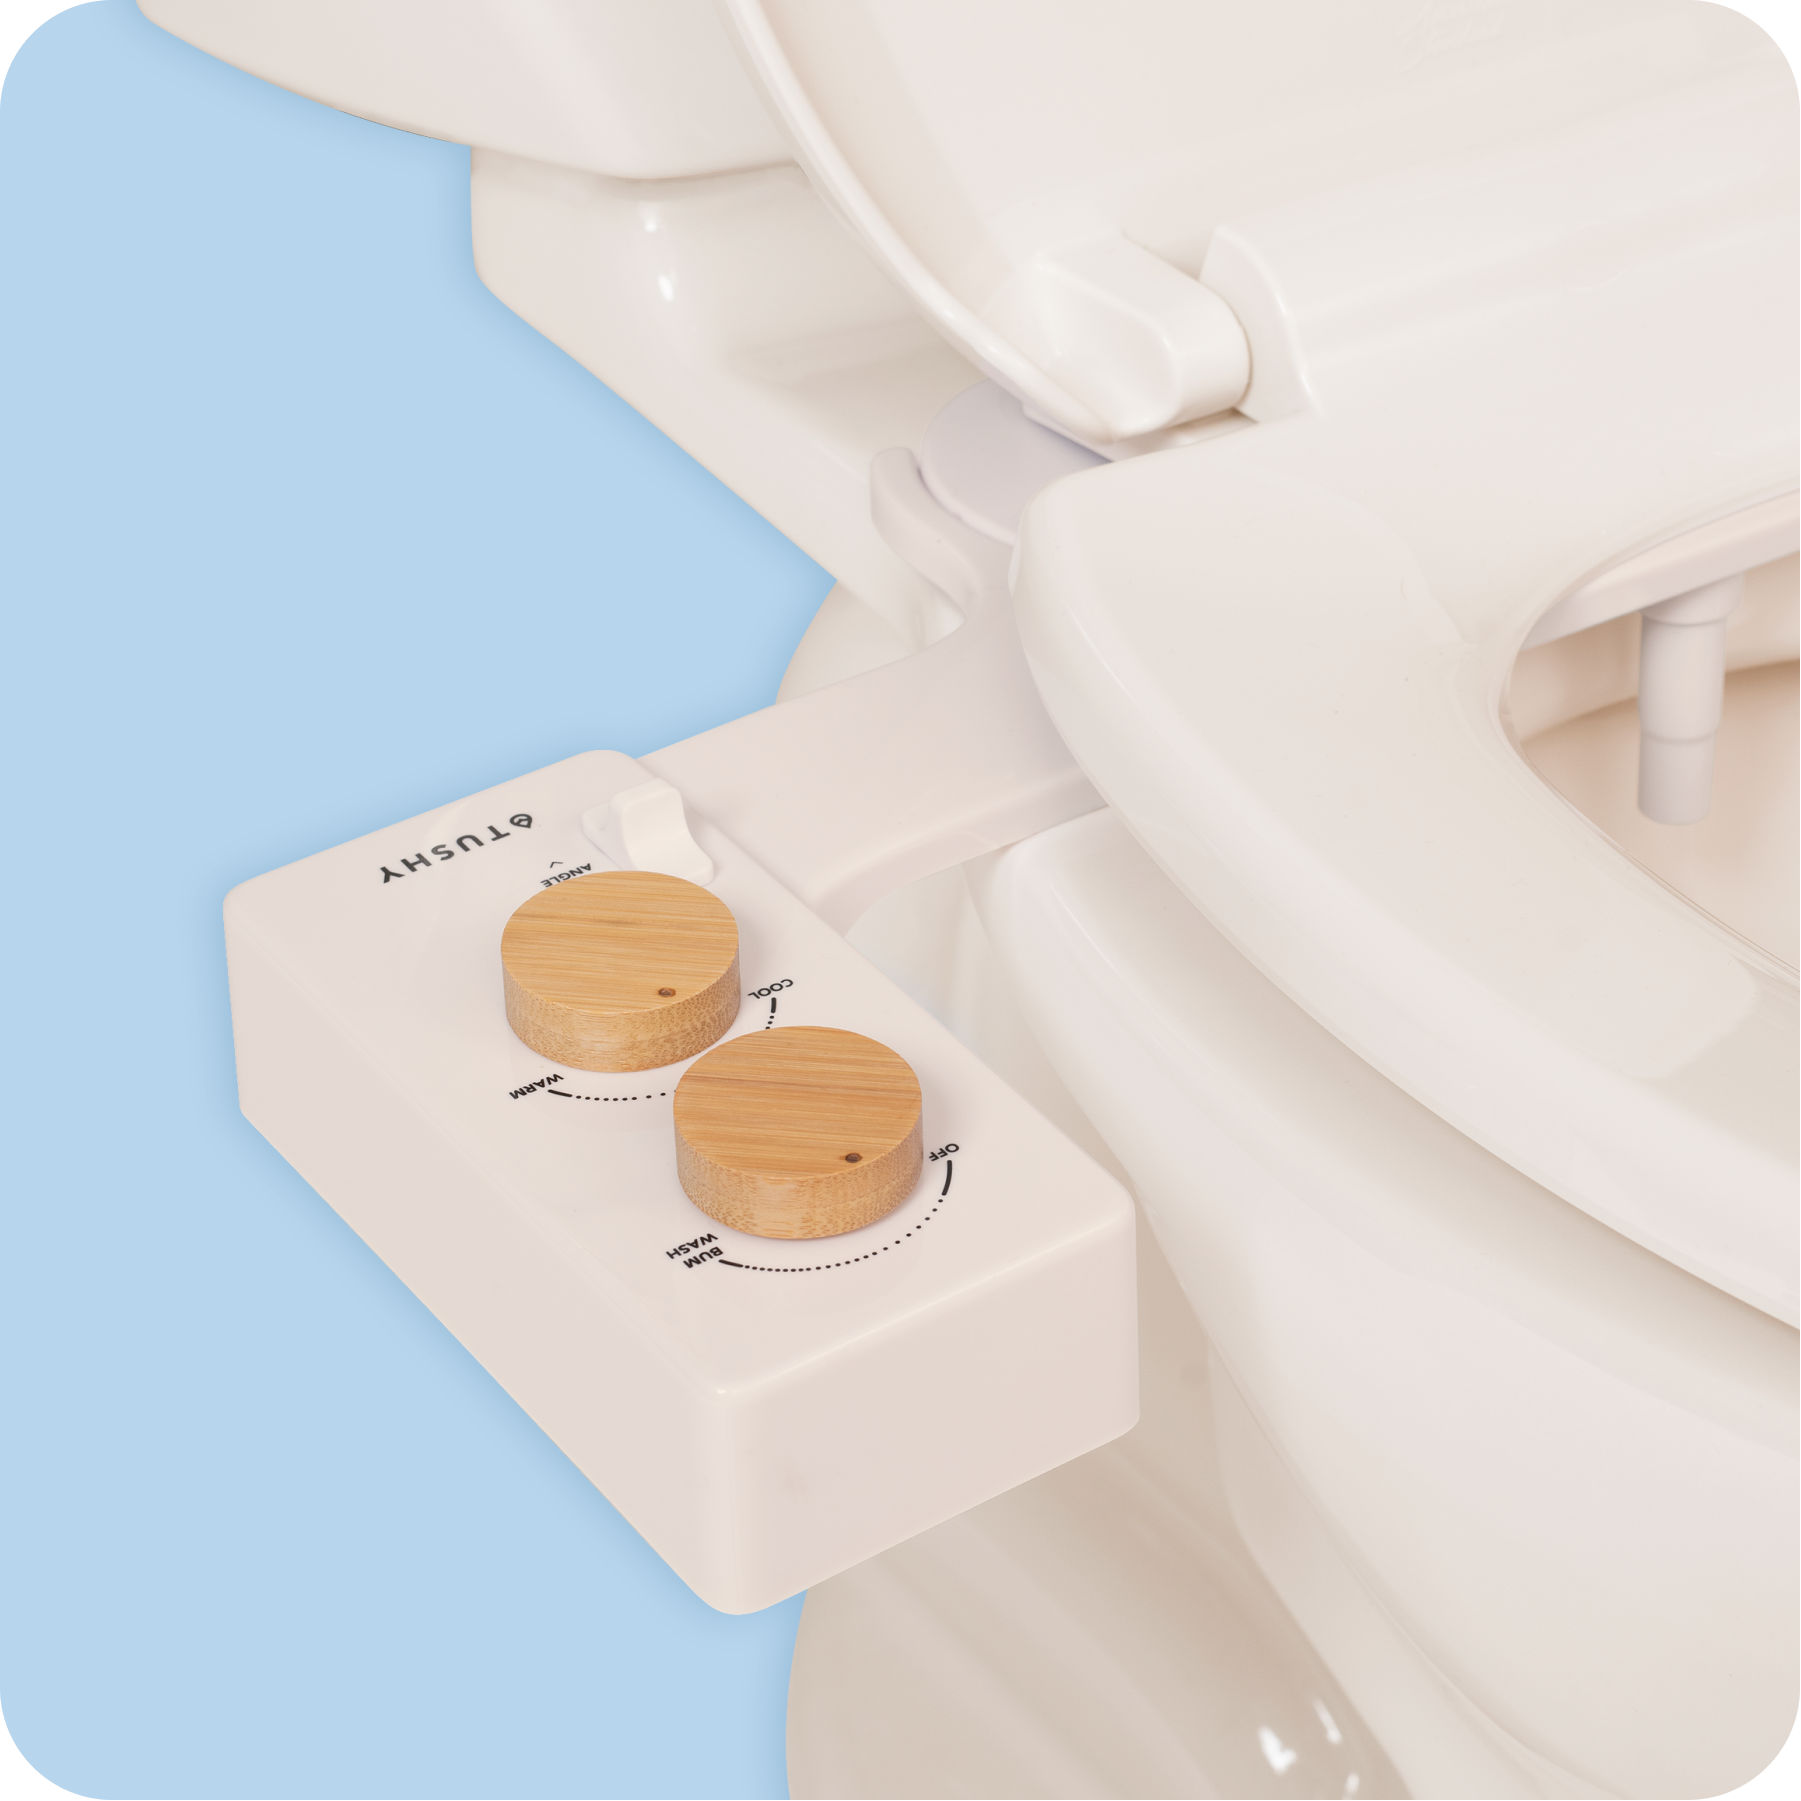 Tushy Spa 3.0 Biscuit/Bamboo - a warm water bidet attachment by TUSHY